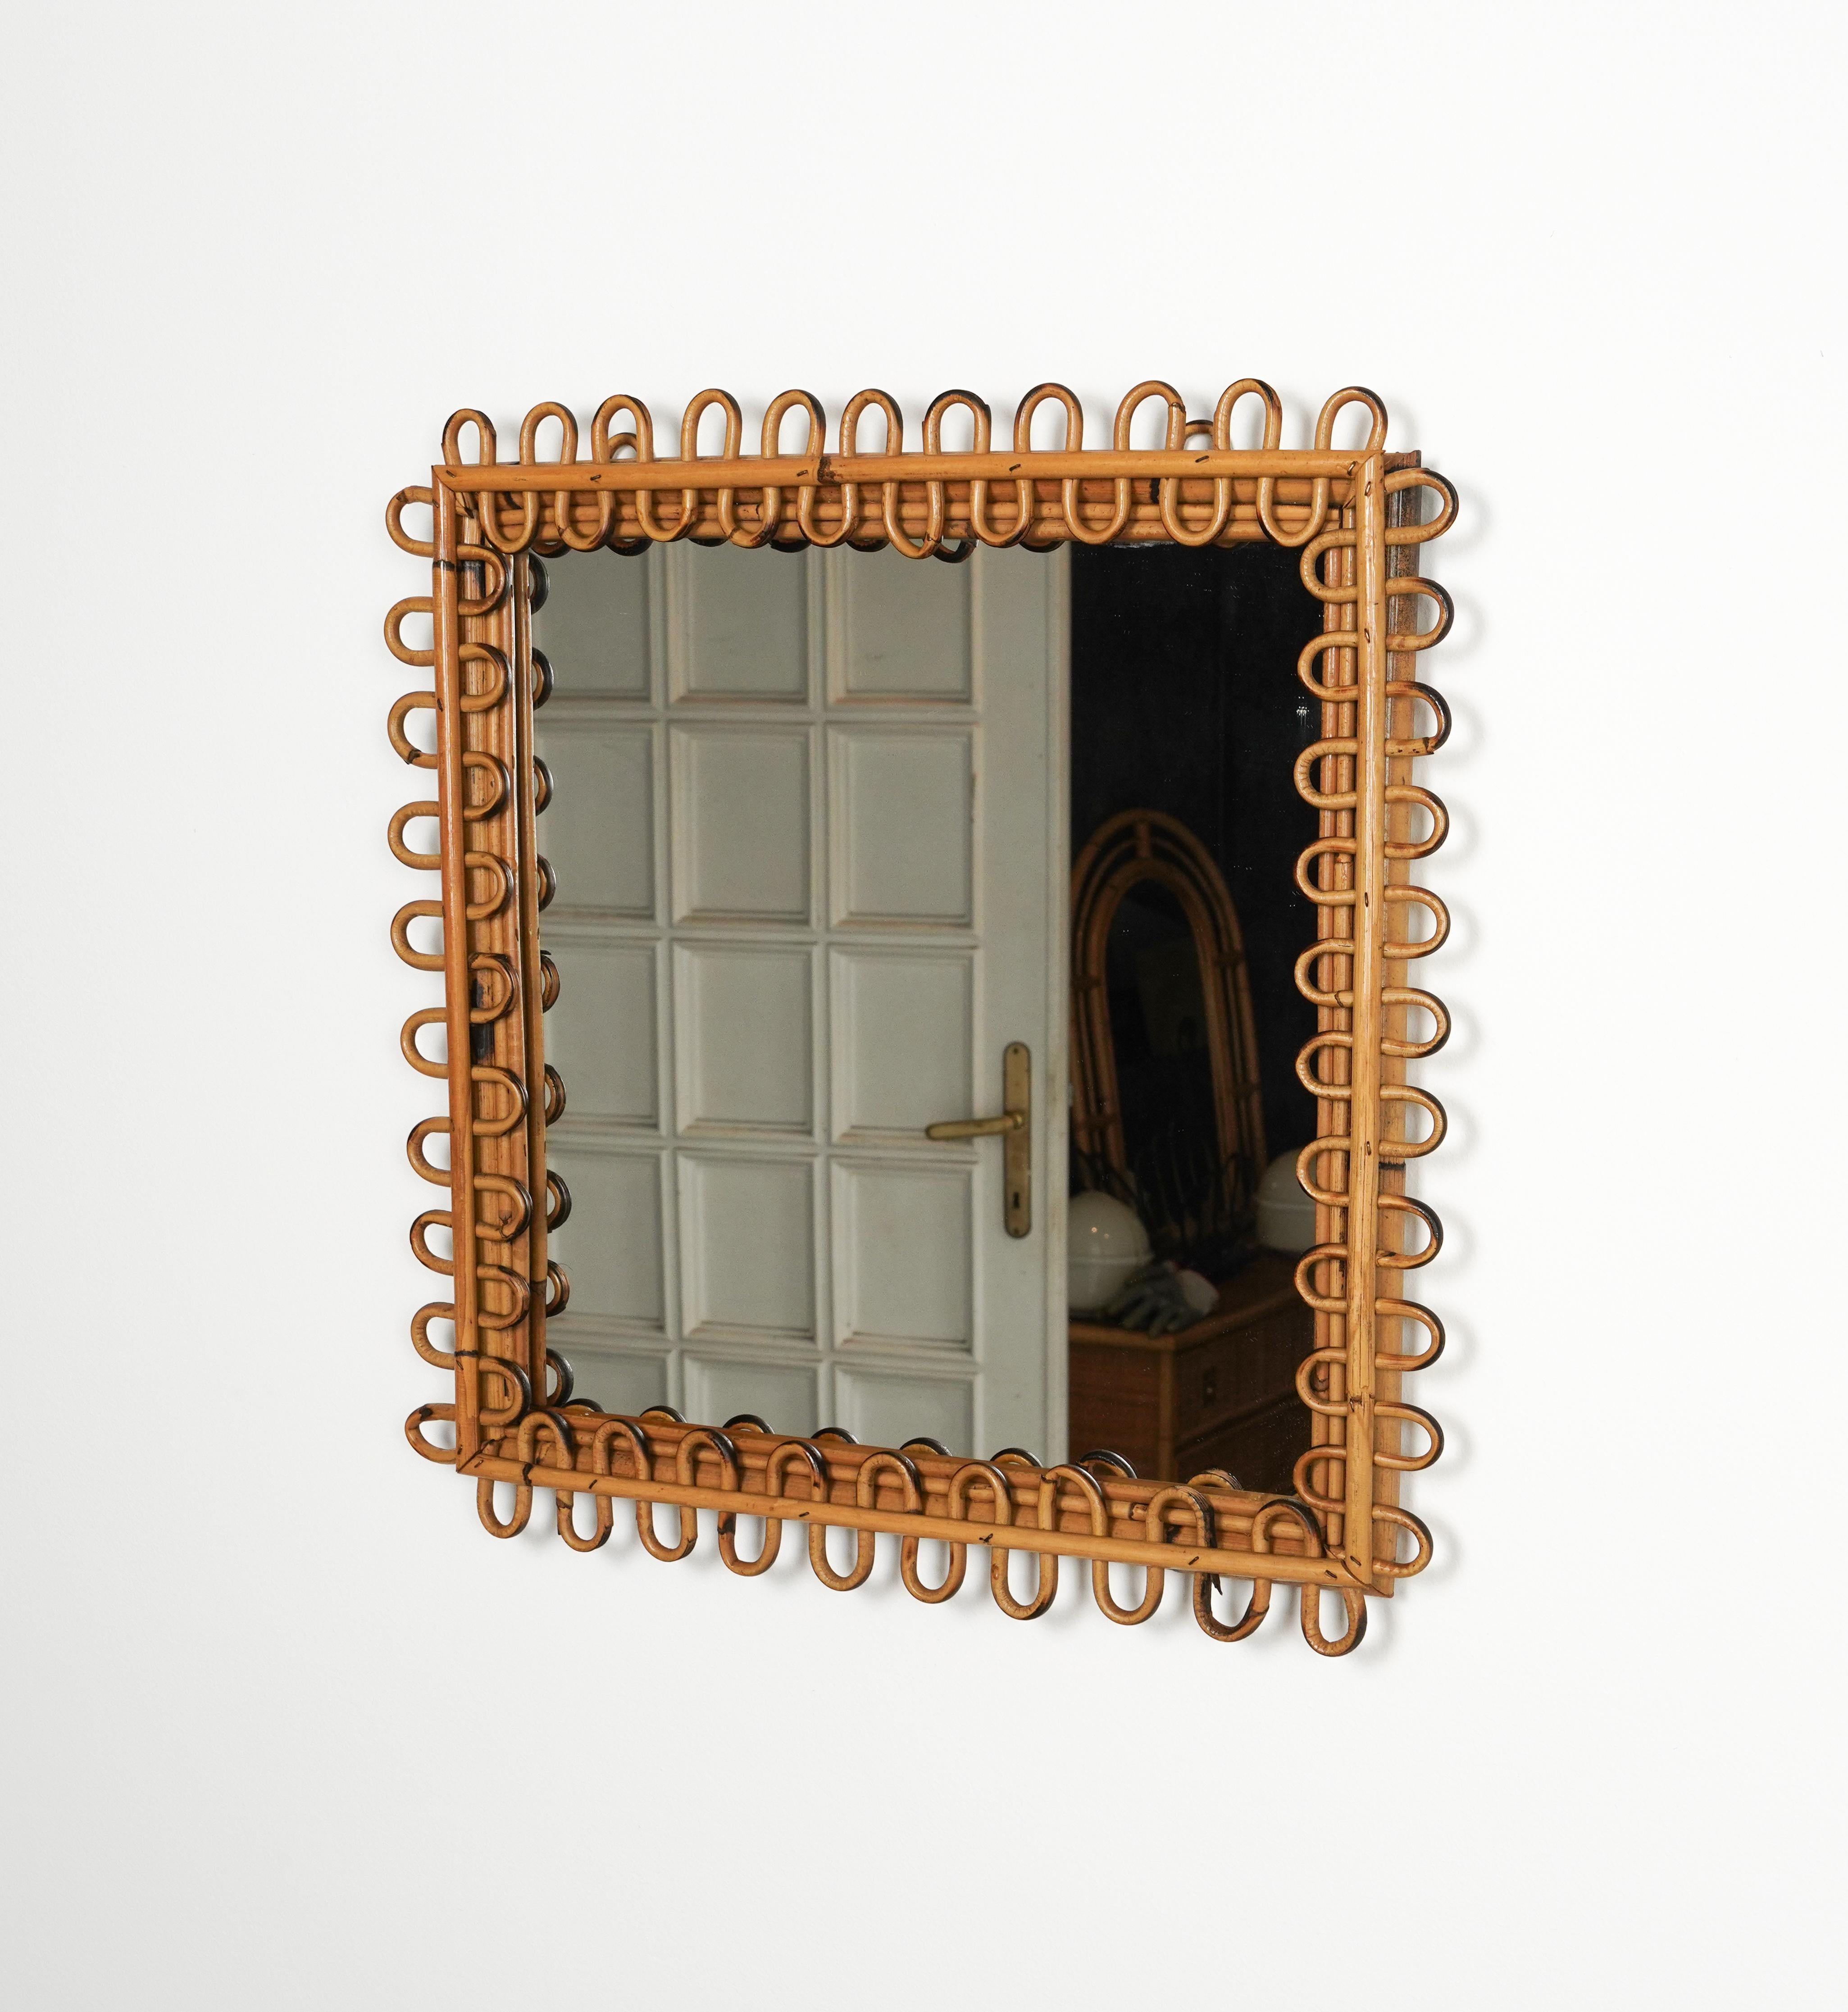 Midcentury Rattan & Bamboo Squared Wall Mirror Franco Albini Style, Italy 1960s For Sale 2